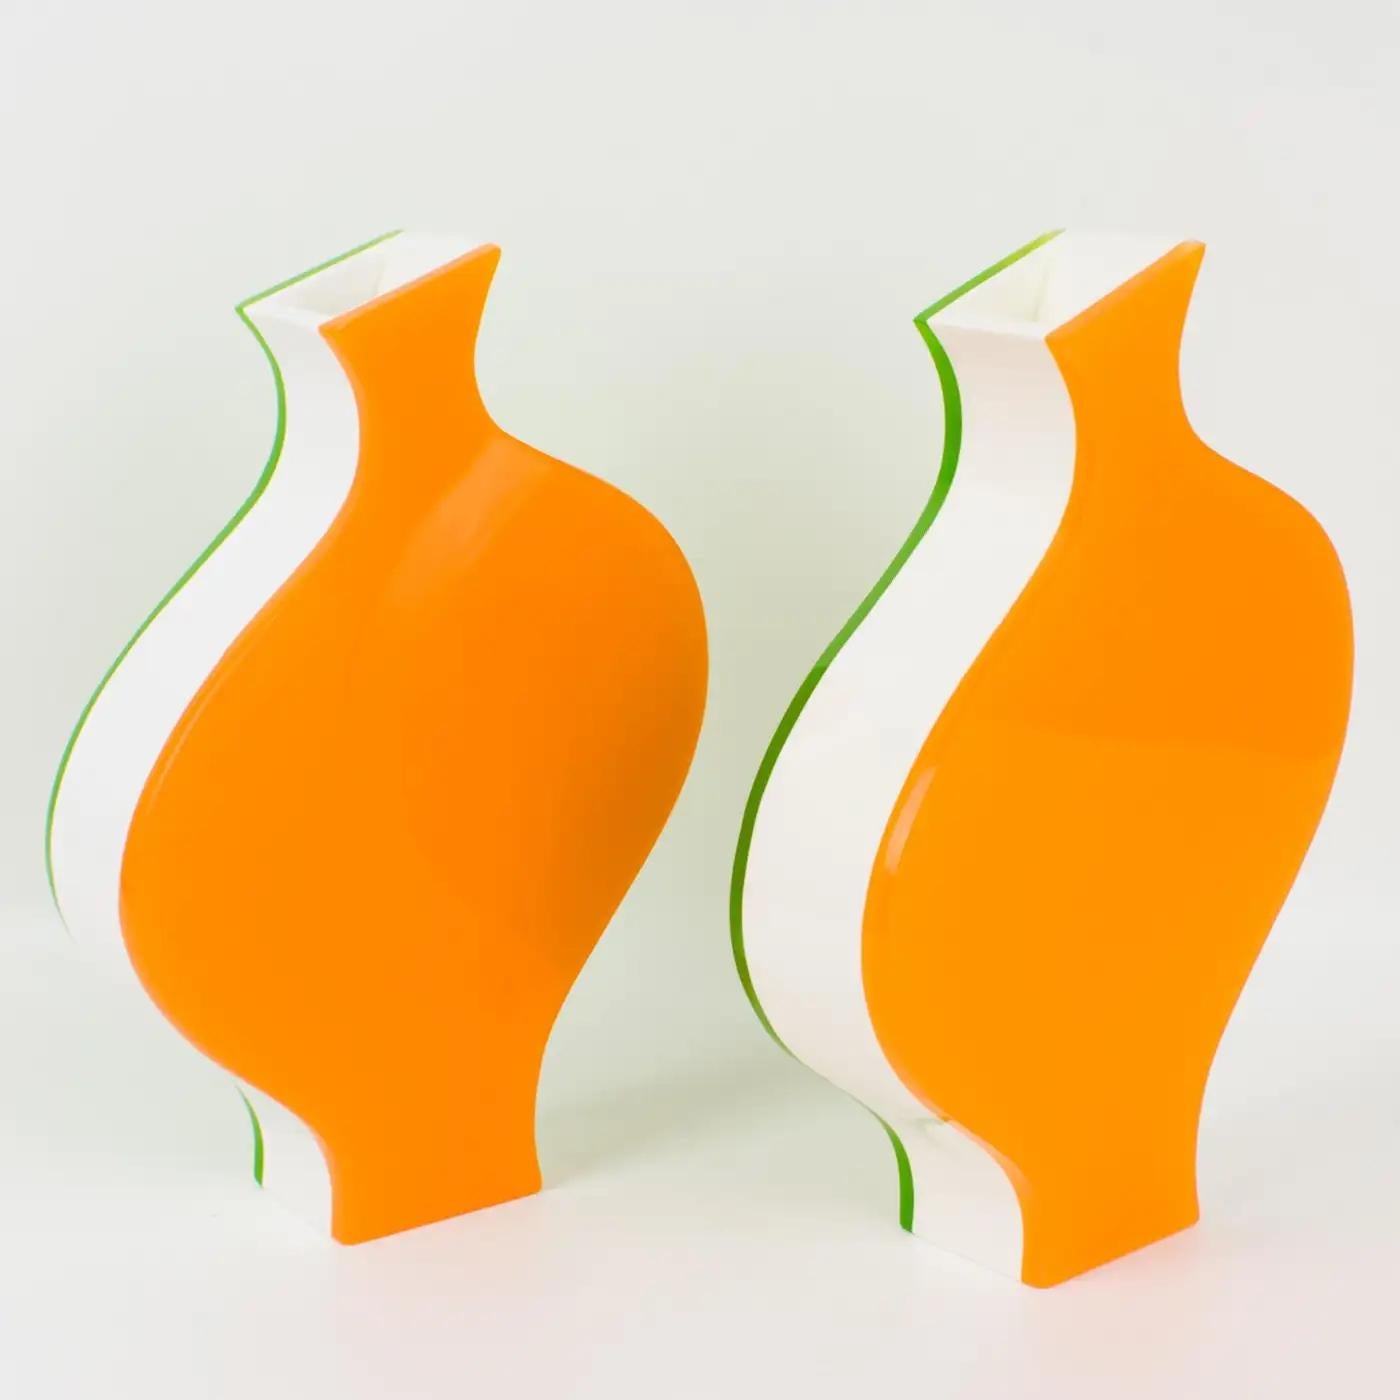 Villeroy & Boch produced that lovely pair of vases in the 1990s. This playful design is modern with an incredible color combination. Each vase is built with a multilayer sandwich shape of Acrylic, Lucite, or Plexiglass in tangerine orange, white,